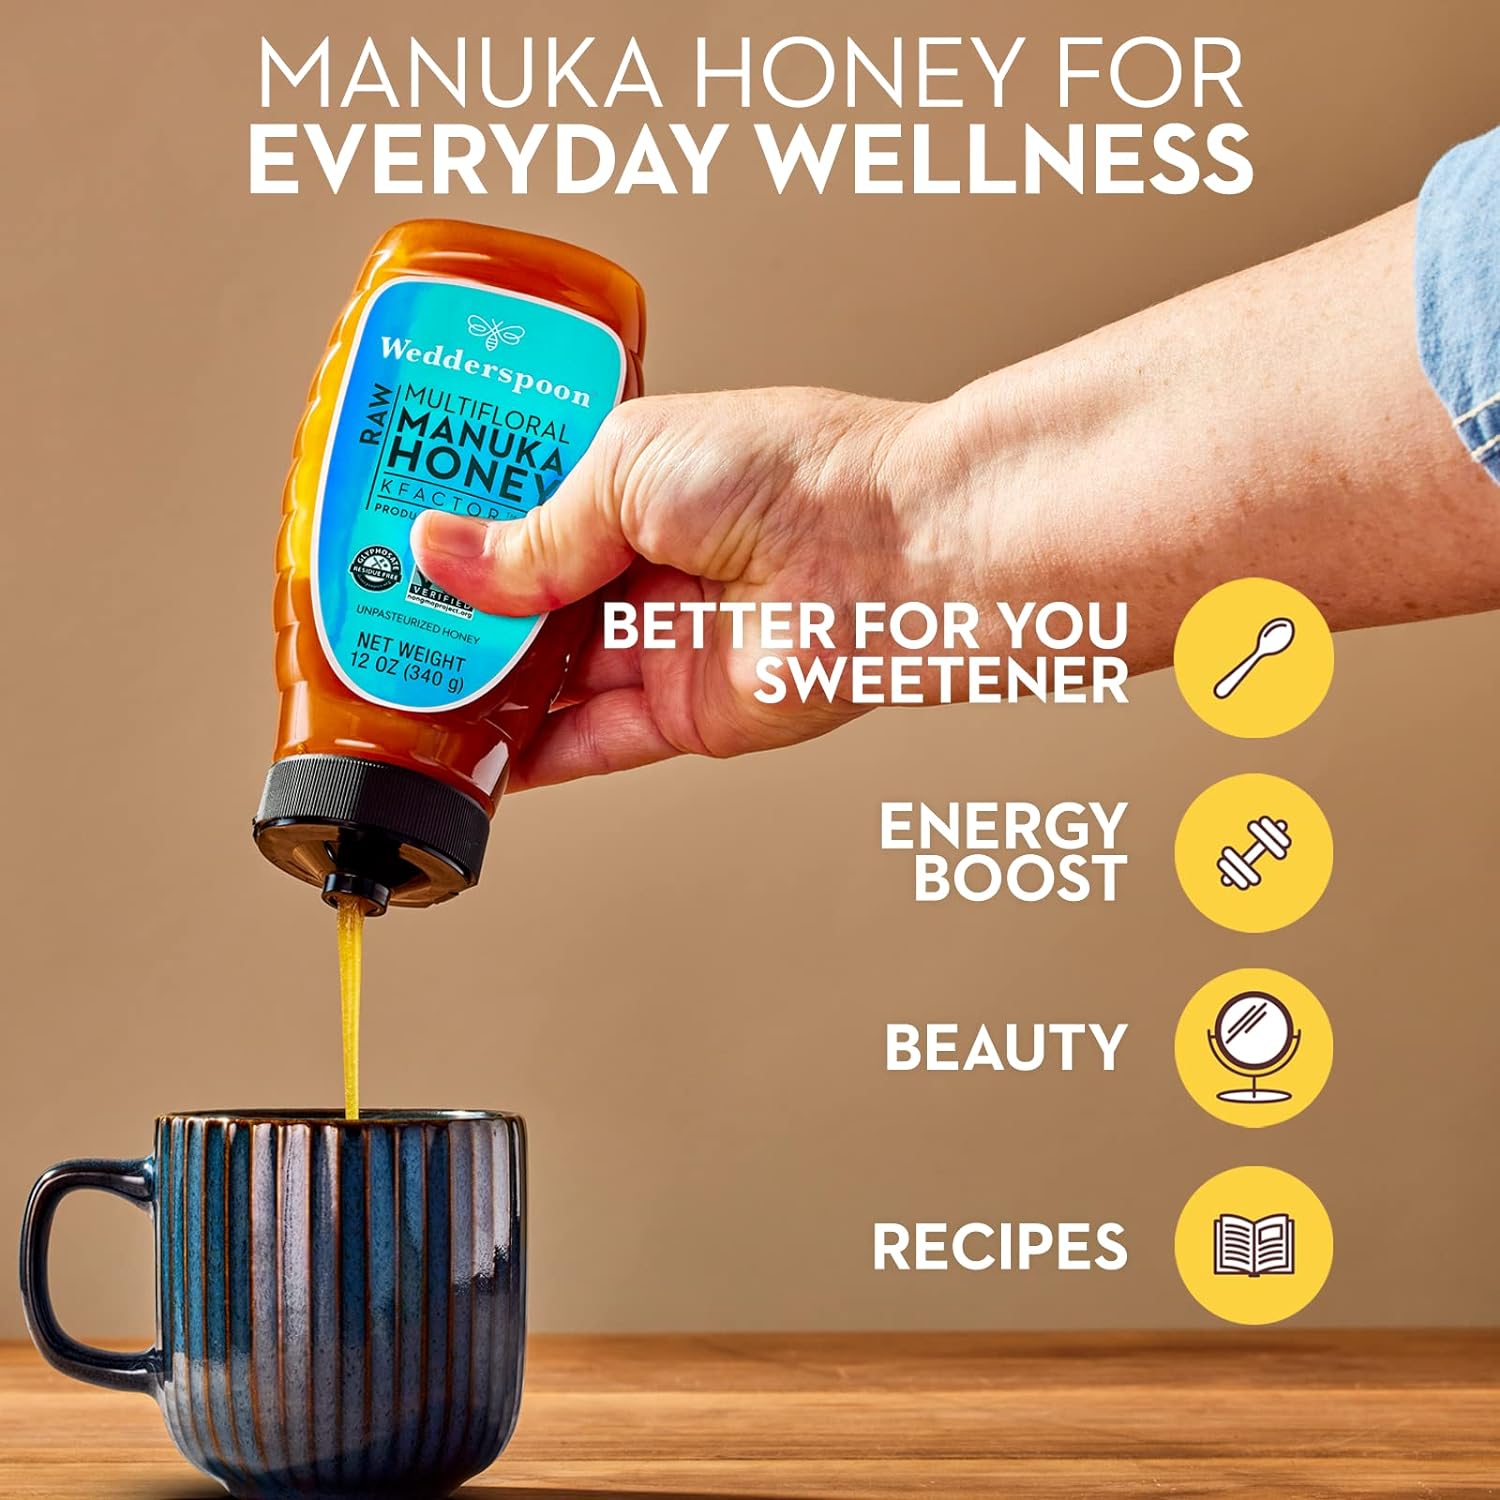 Wedderspoon Raw Premium Manuka Honey, KFactor 12, 12 Oz, Unpasteurized, Genuine New Zealand Honey, Non-GMO Superfood, Traceable from Our Hives to Your Home, Convenient Squeeze Bottle : Grocery & Gourmet Food